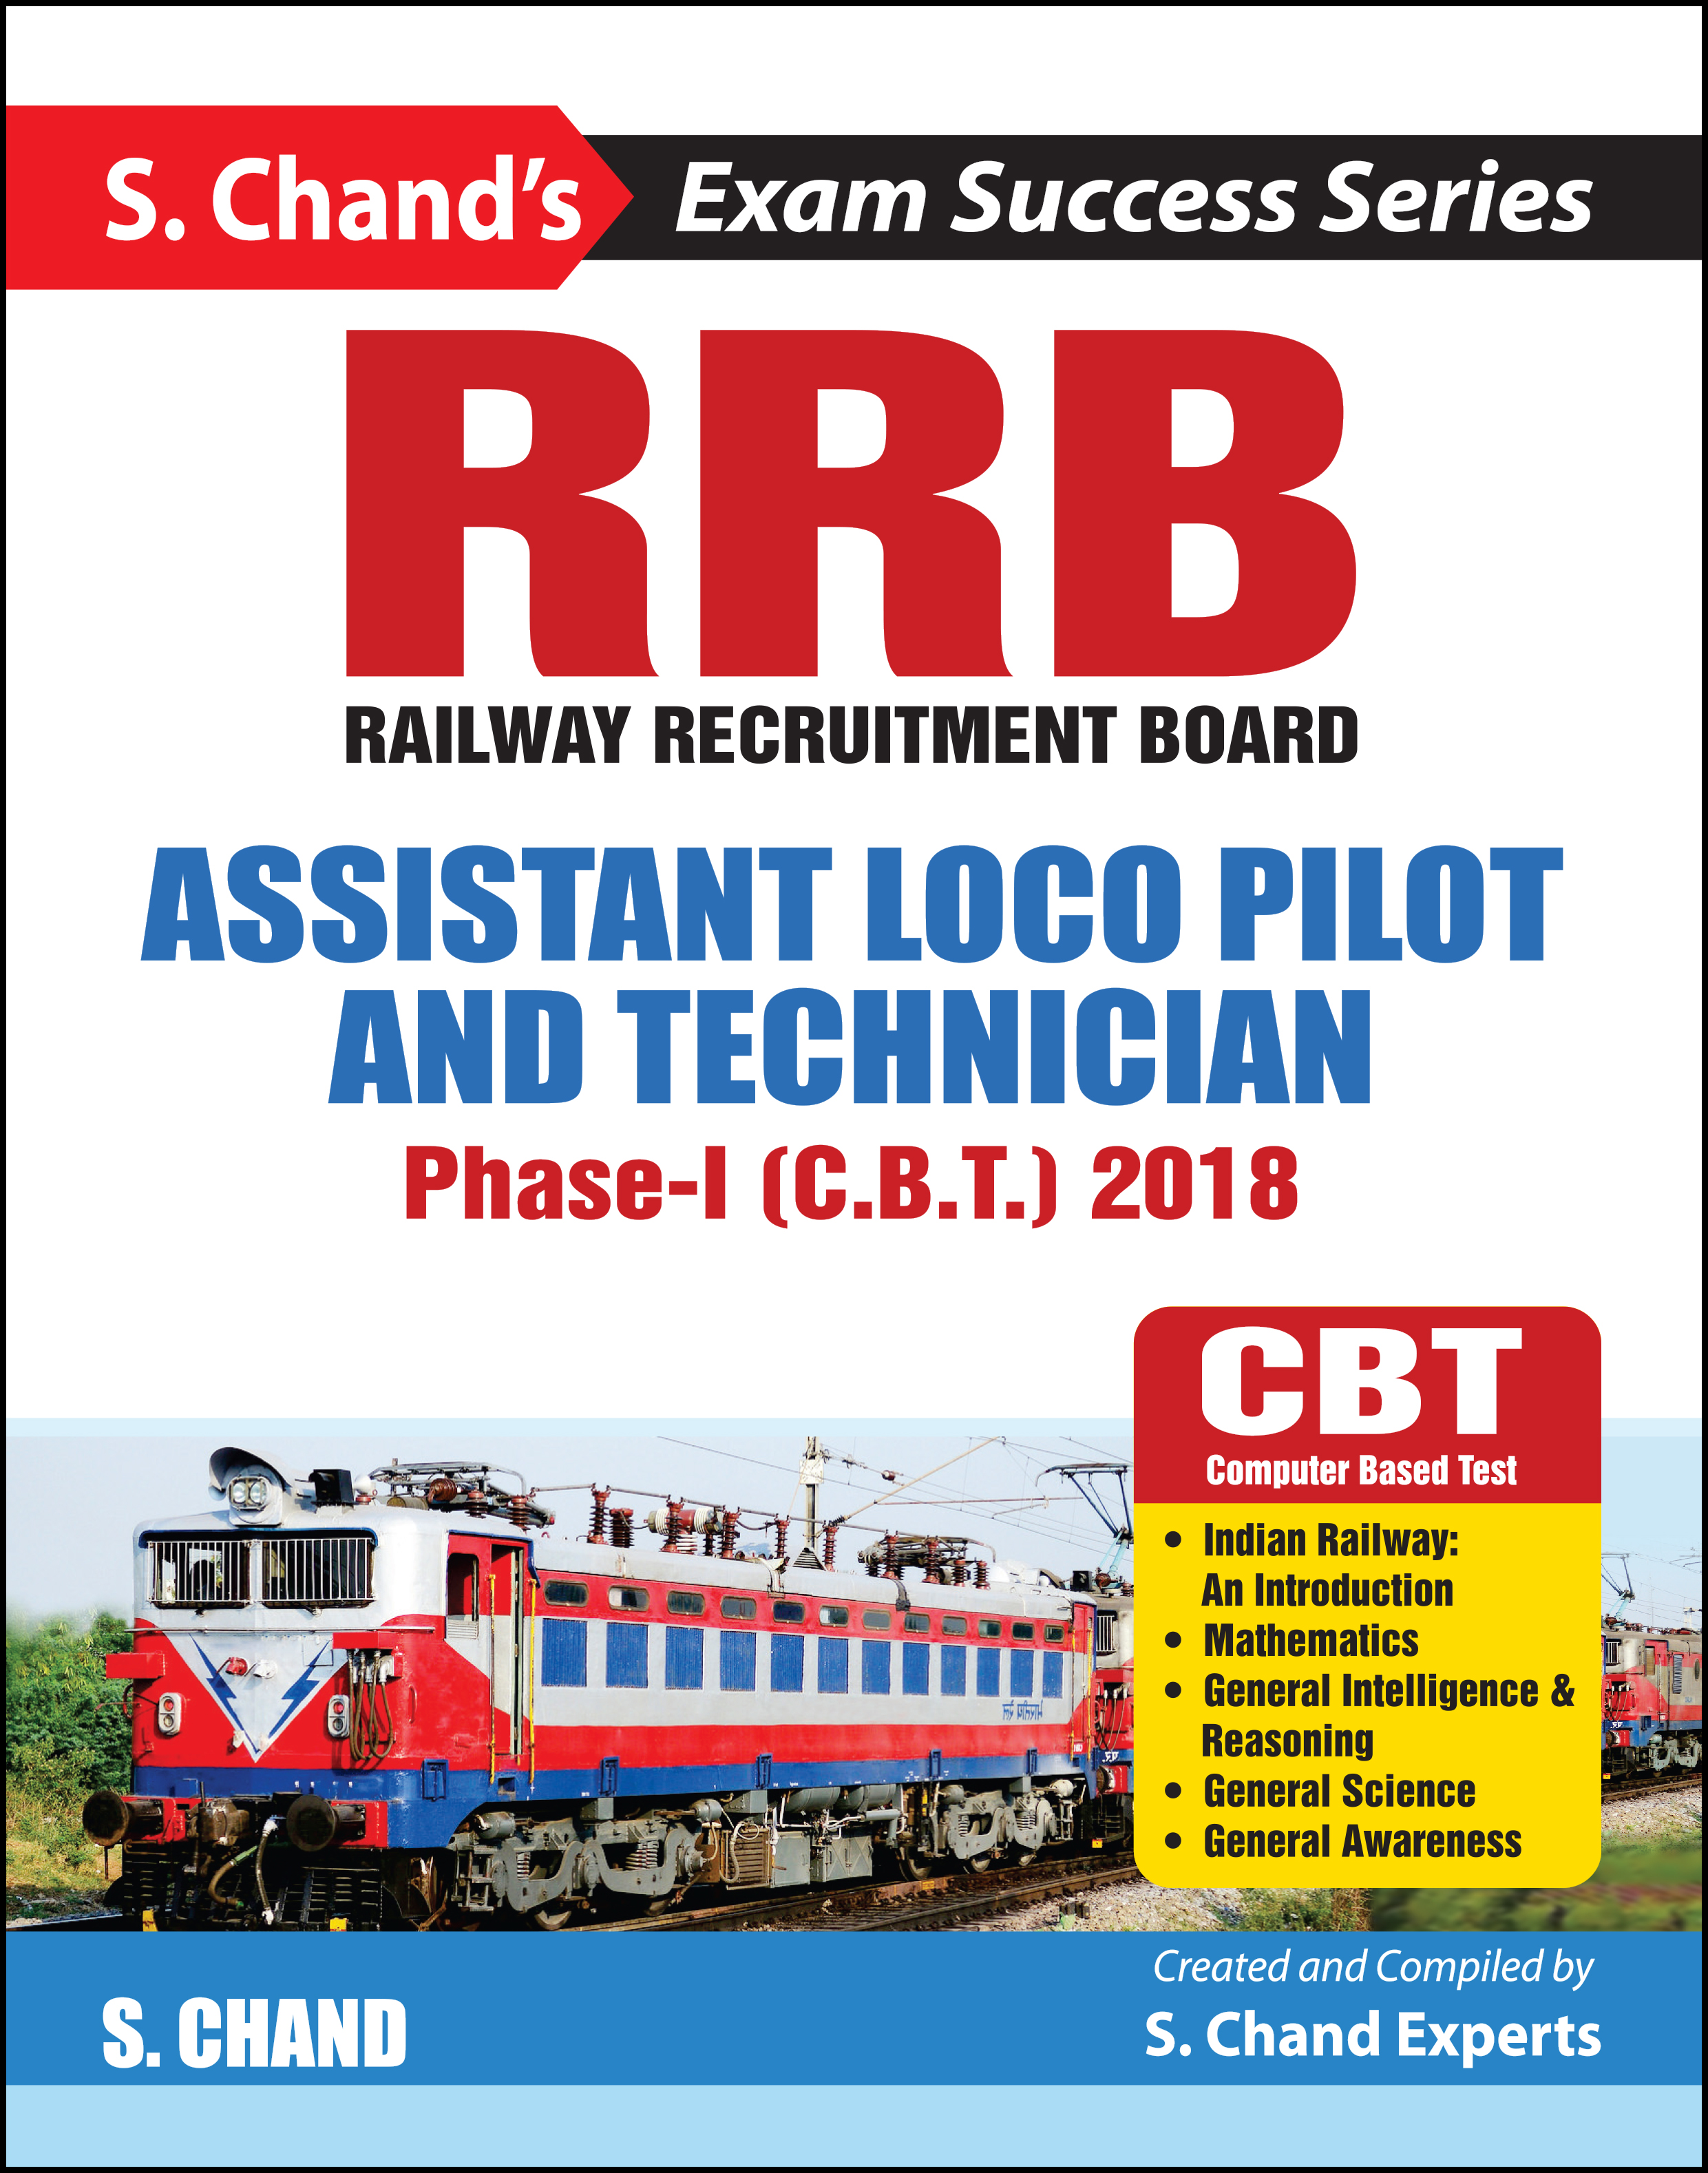 RRB Assistant Loco Pilot and Technician Recruitment Phase-I (C.B.T.) 2018 (Guide)